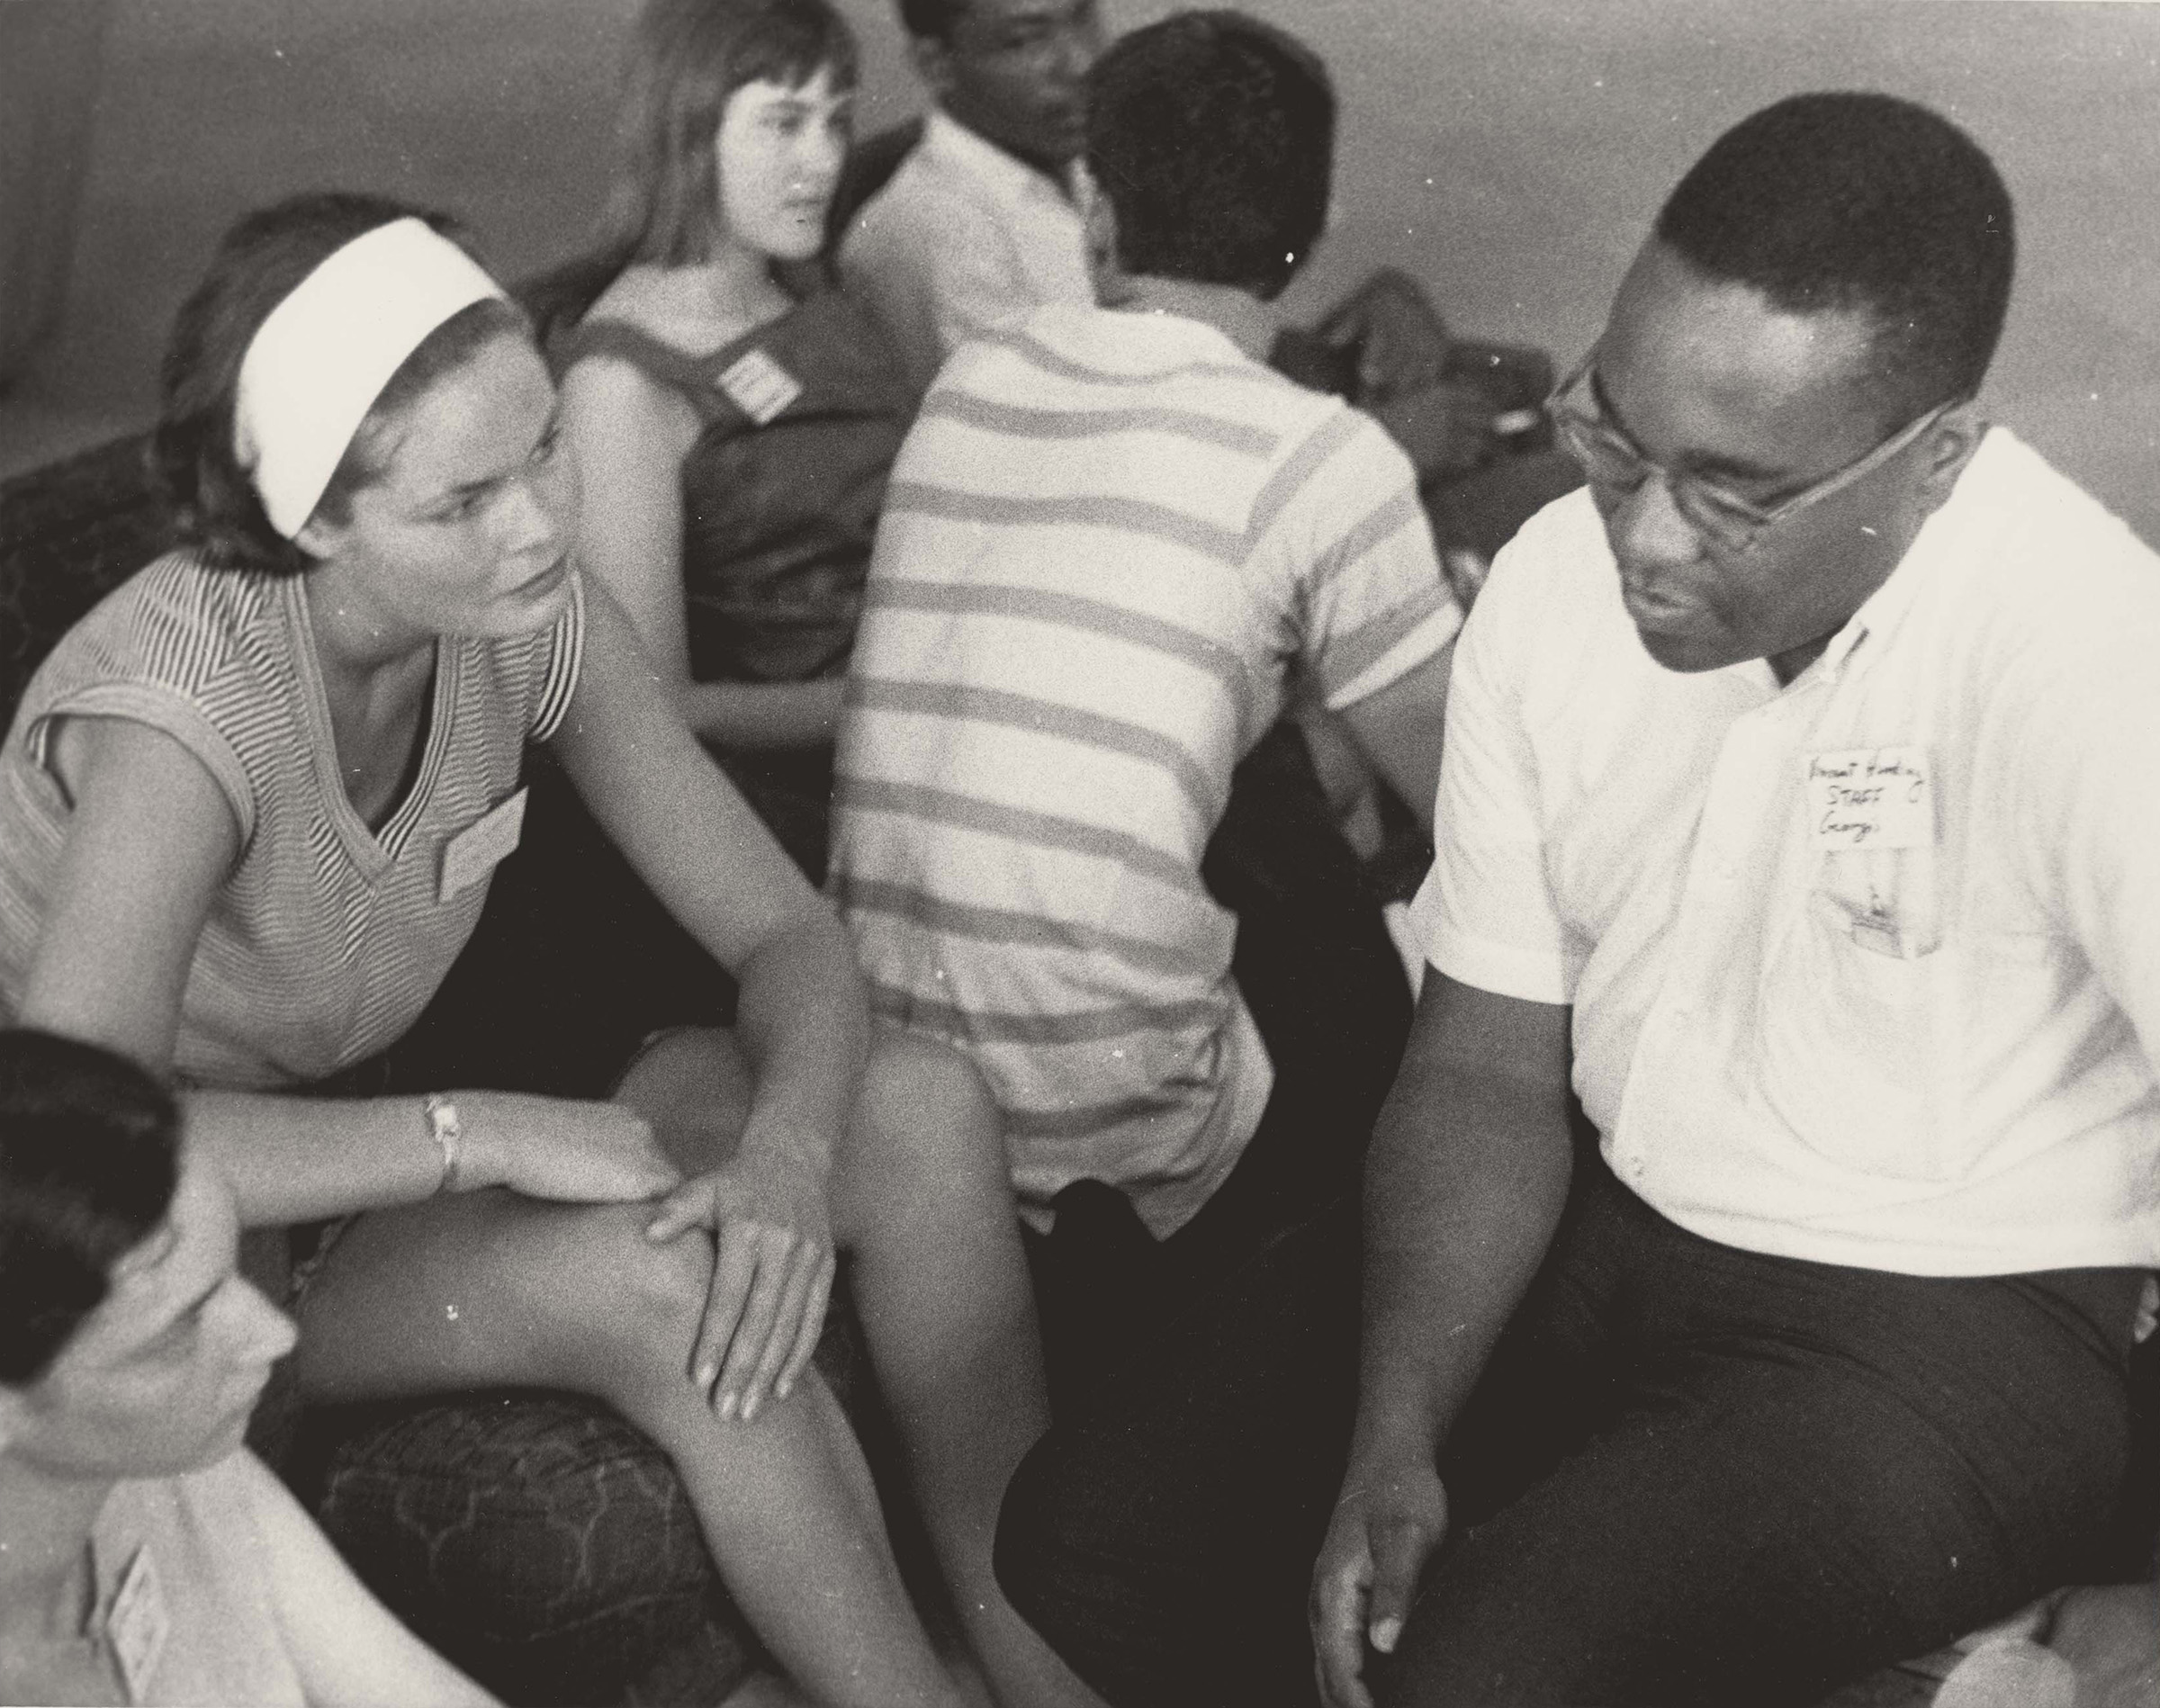 Volunteers at Orientation, June 1964. Photograph by Herbert Randall. SNCC orientation staff member, the Reverend Dr. Vincent Harding, talks to two volunteers at the Freedom Summer orientation session. M351 Herbert Randall Freedom Summer Photographs, Historical Manuscripts, The University of Southern Mississippi.